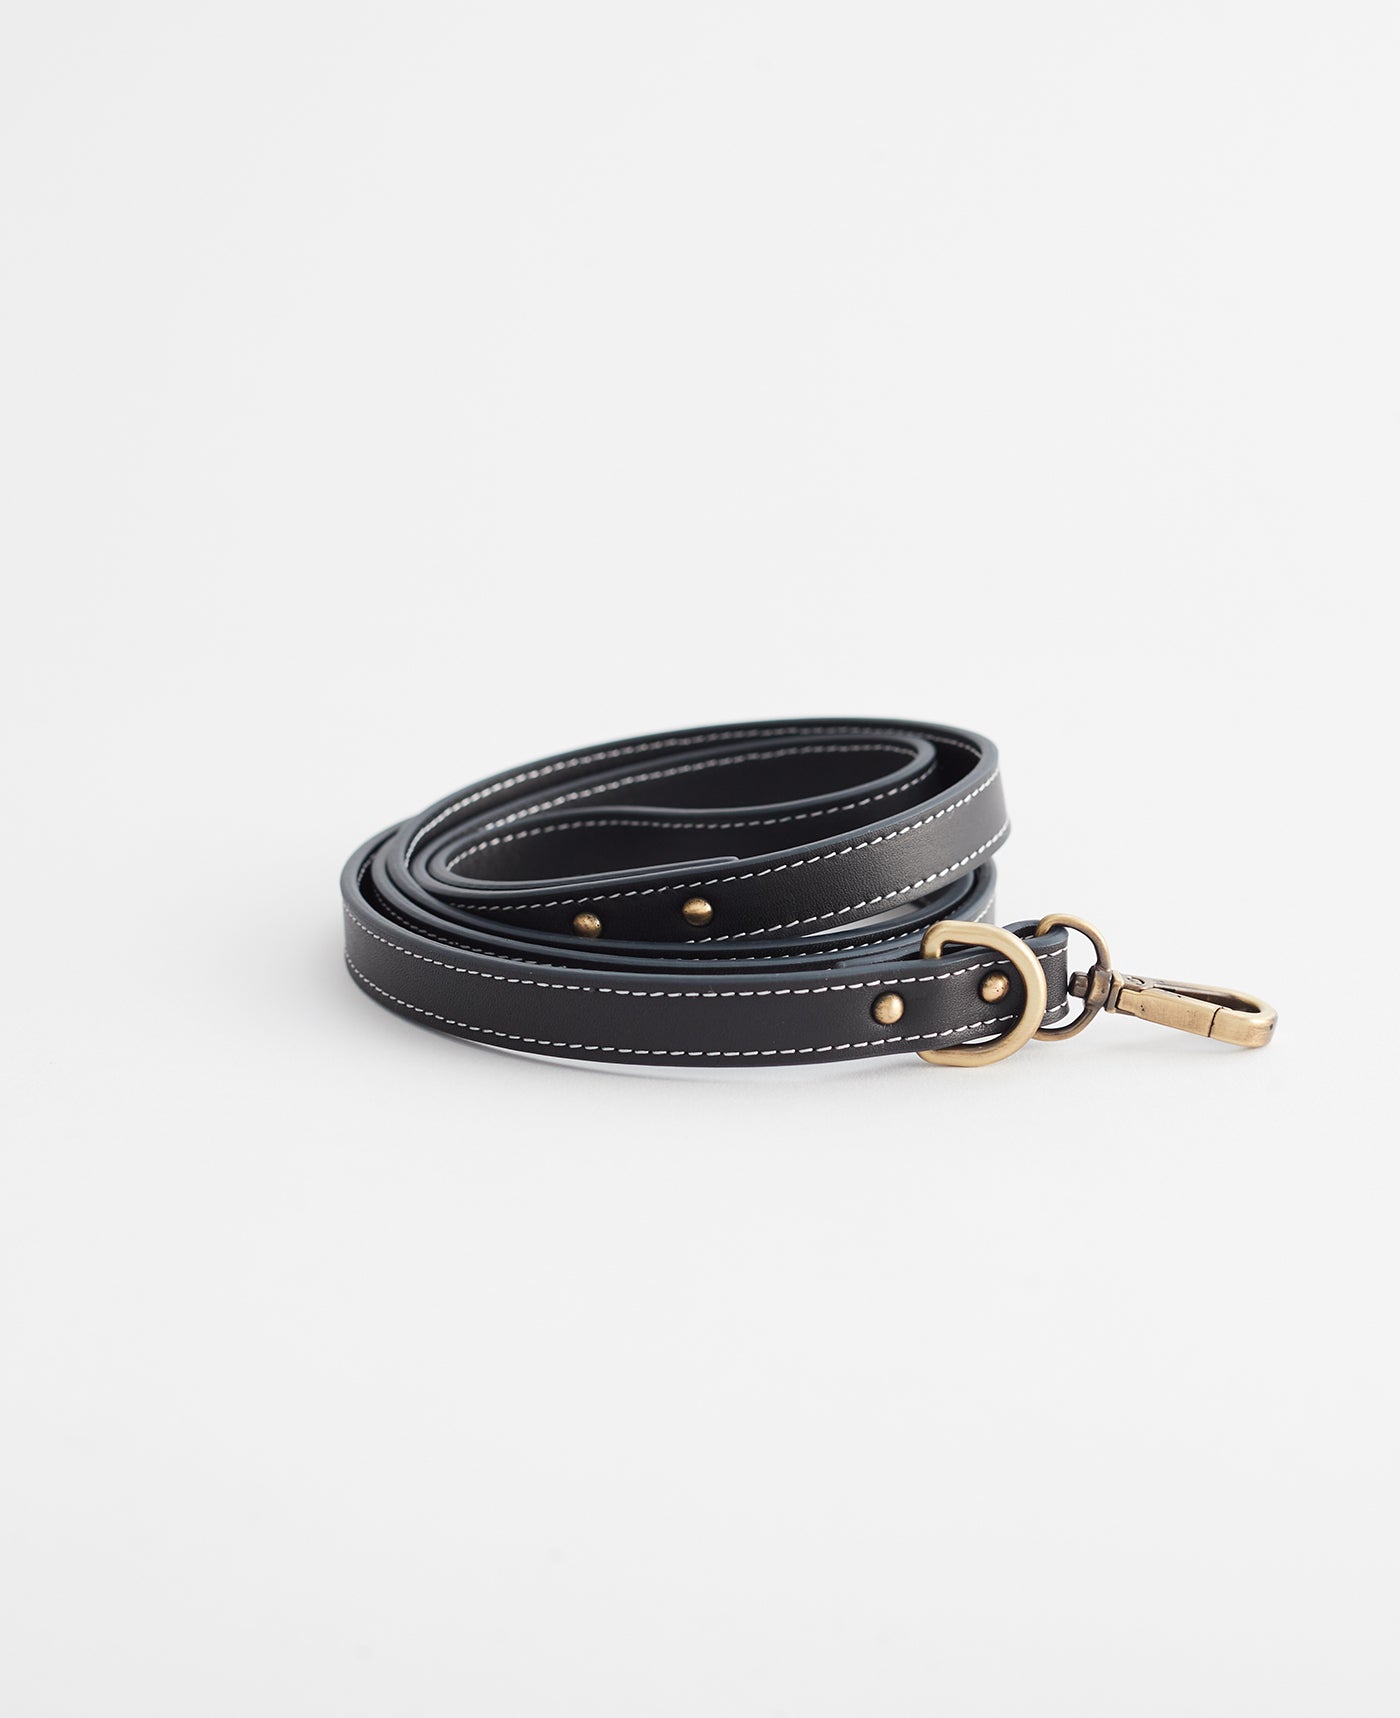 Leather Dog Lead/Leash in Black - Size Large by The Horse®